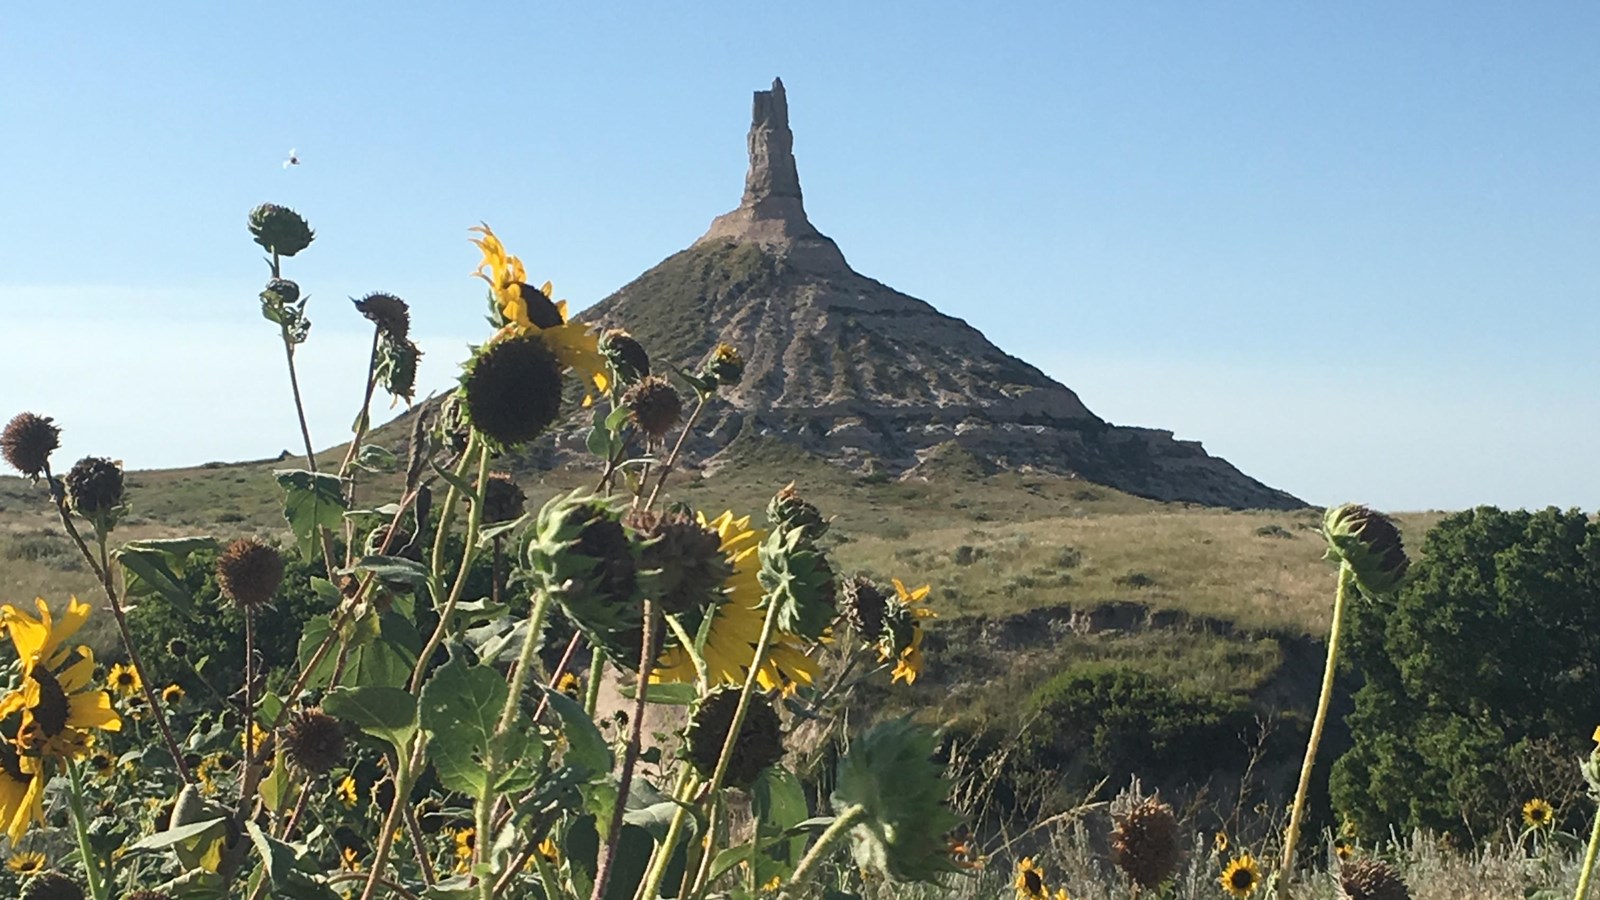 Sunflowers in the foreground with a distant, chimney-shaped rock feature.